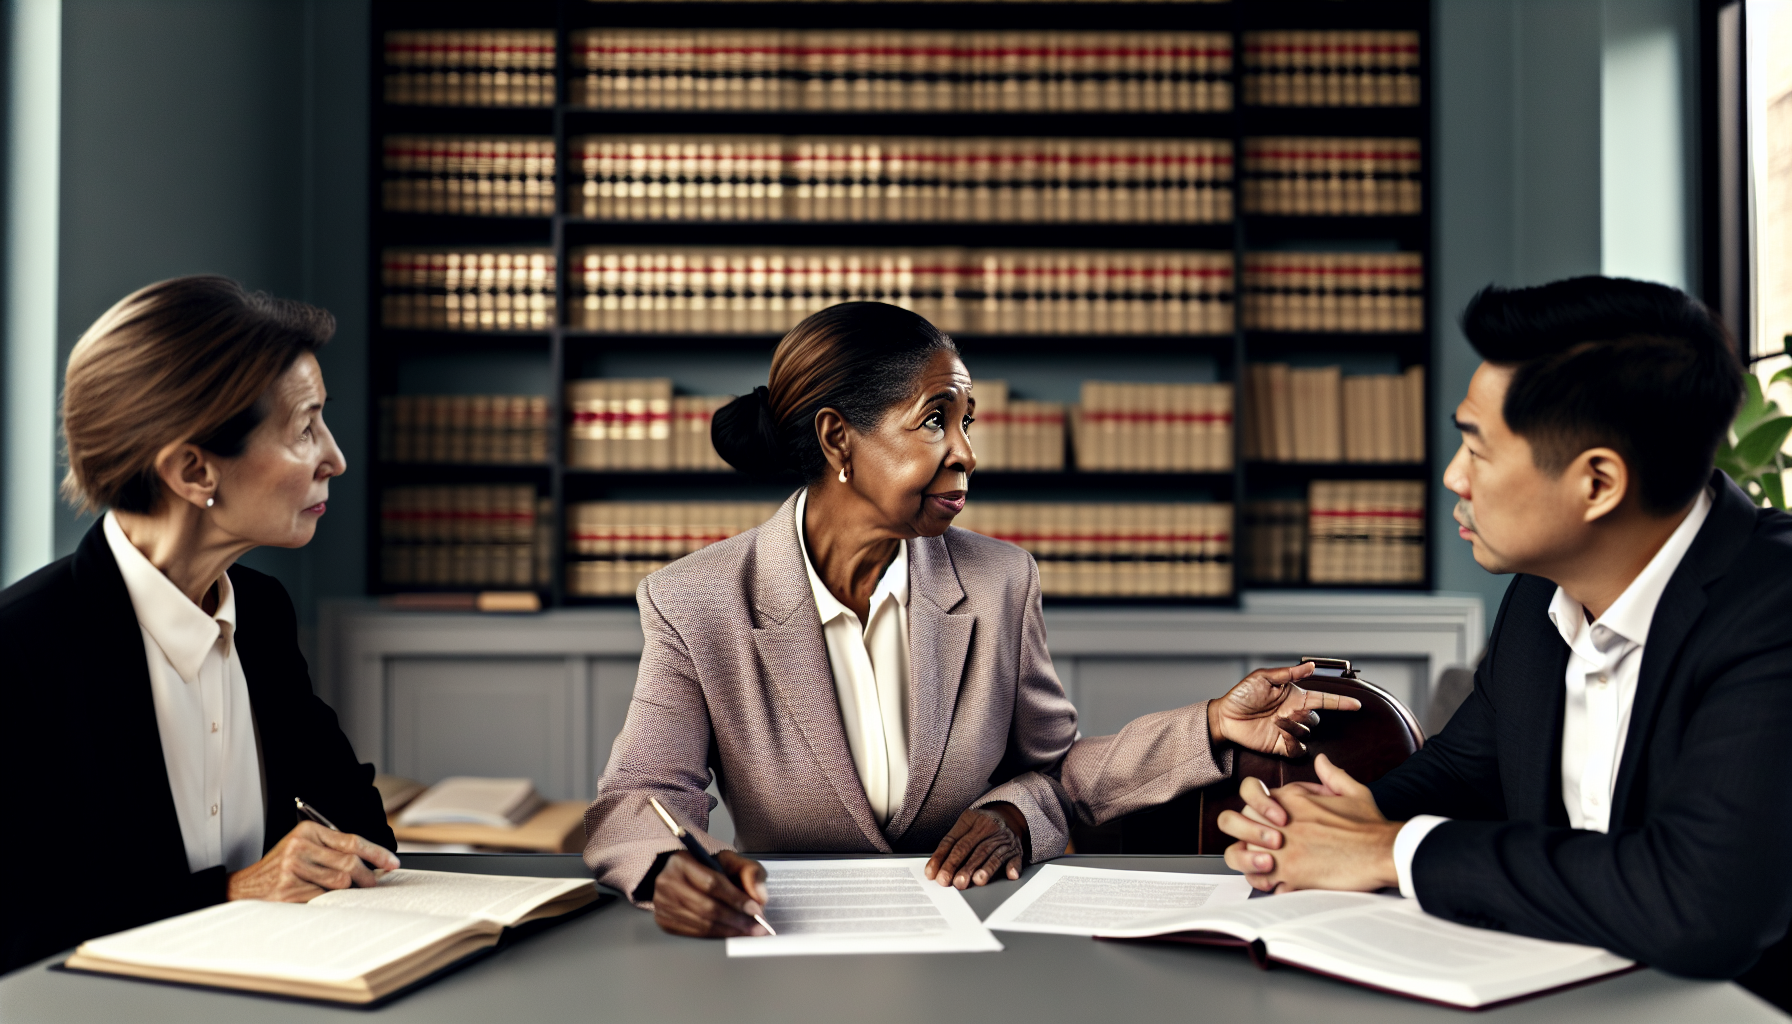 Consult an Estate Planning Attorney